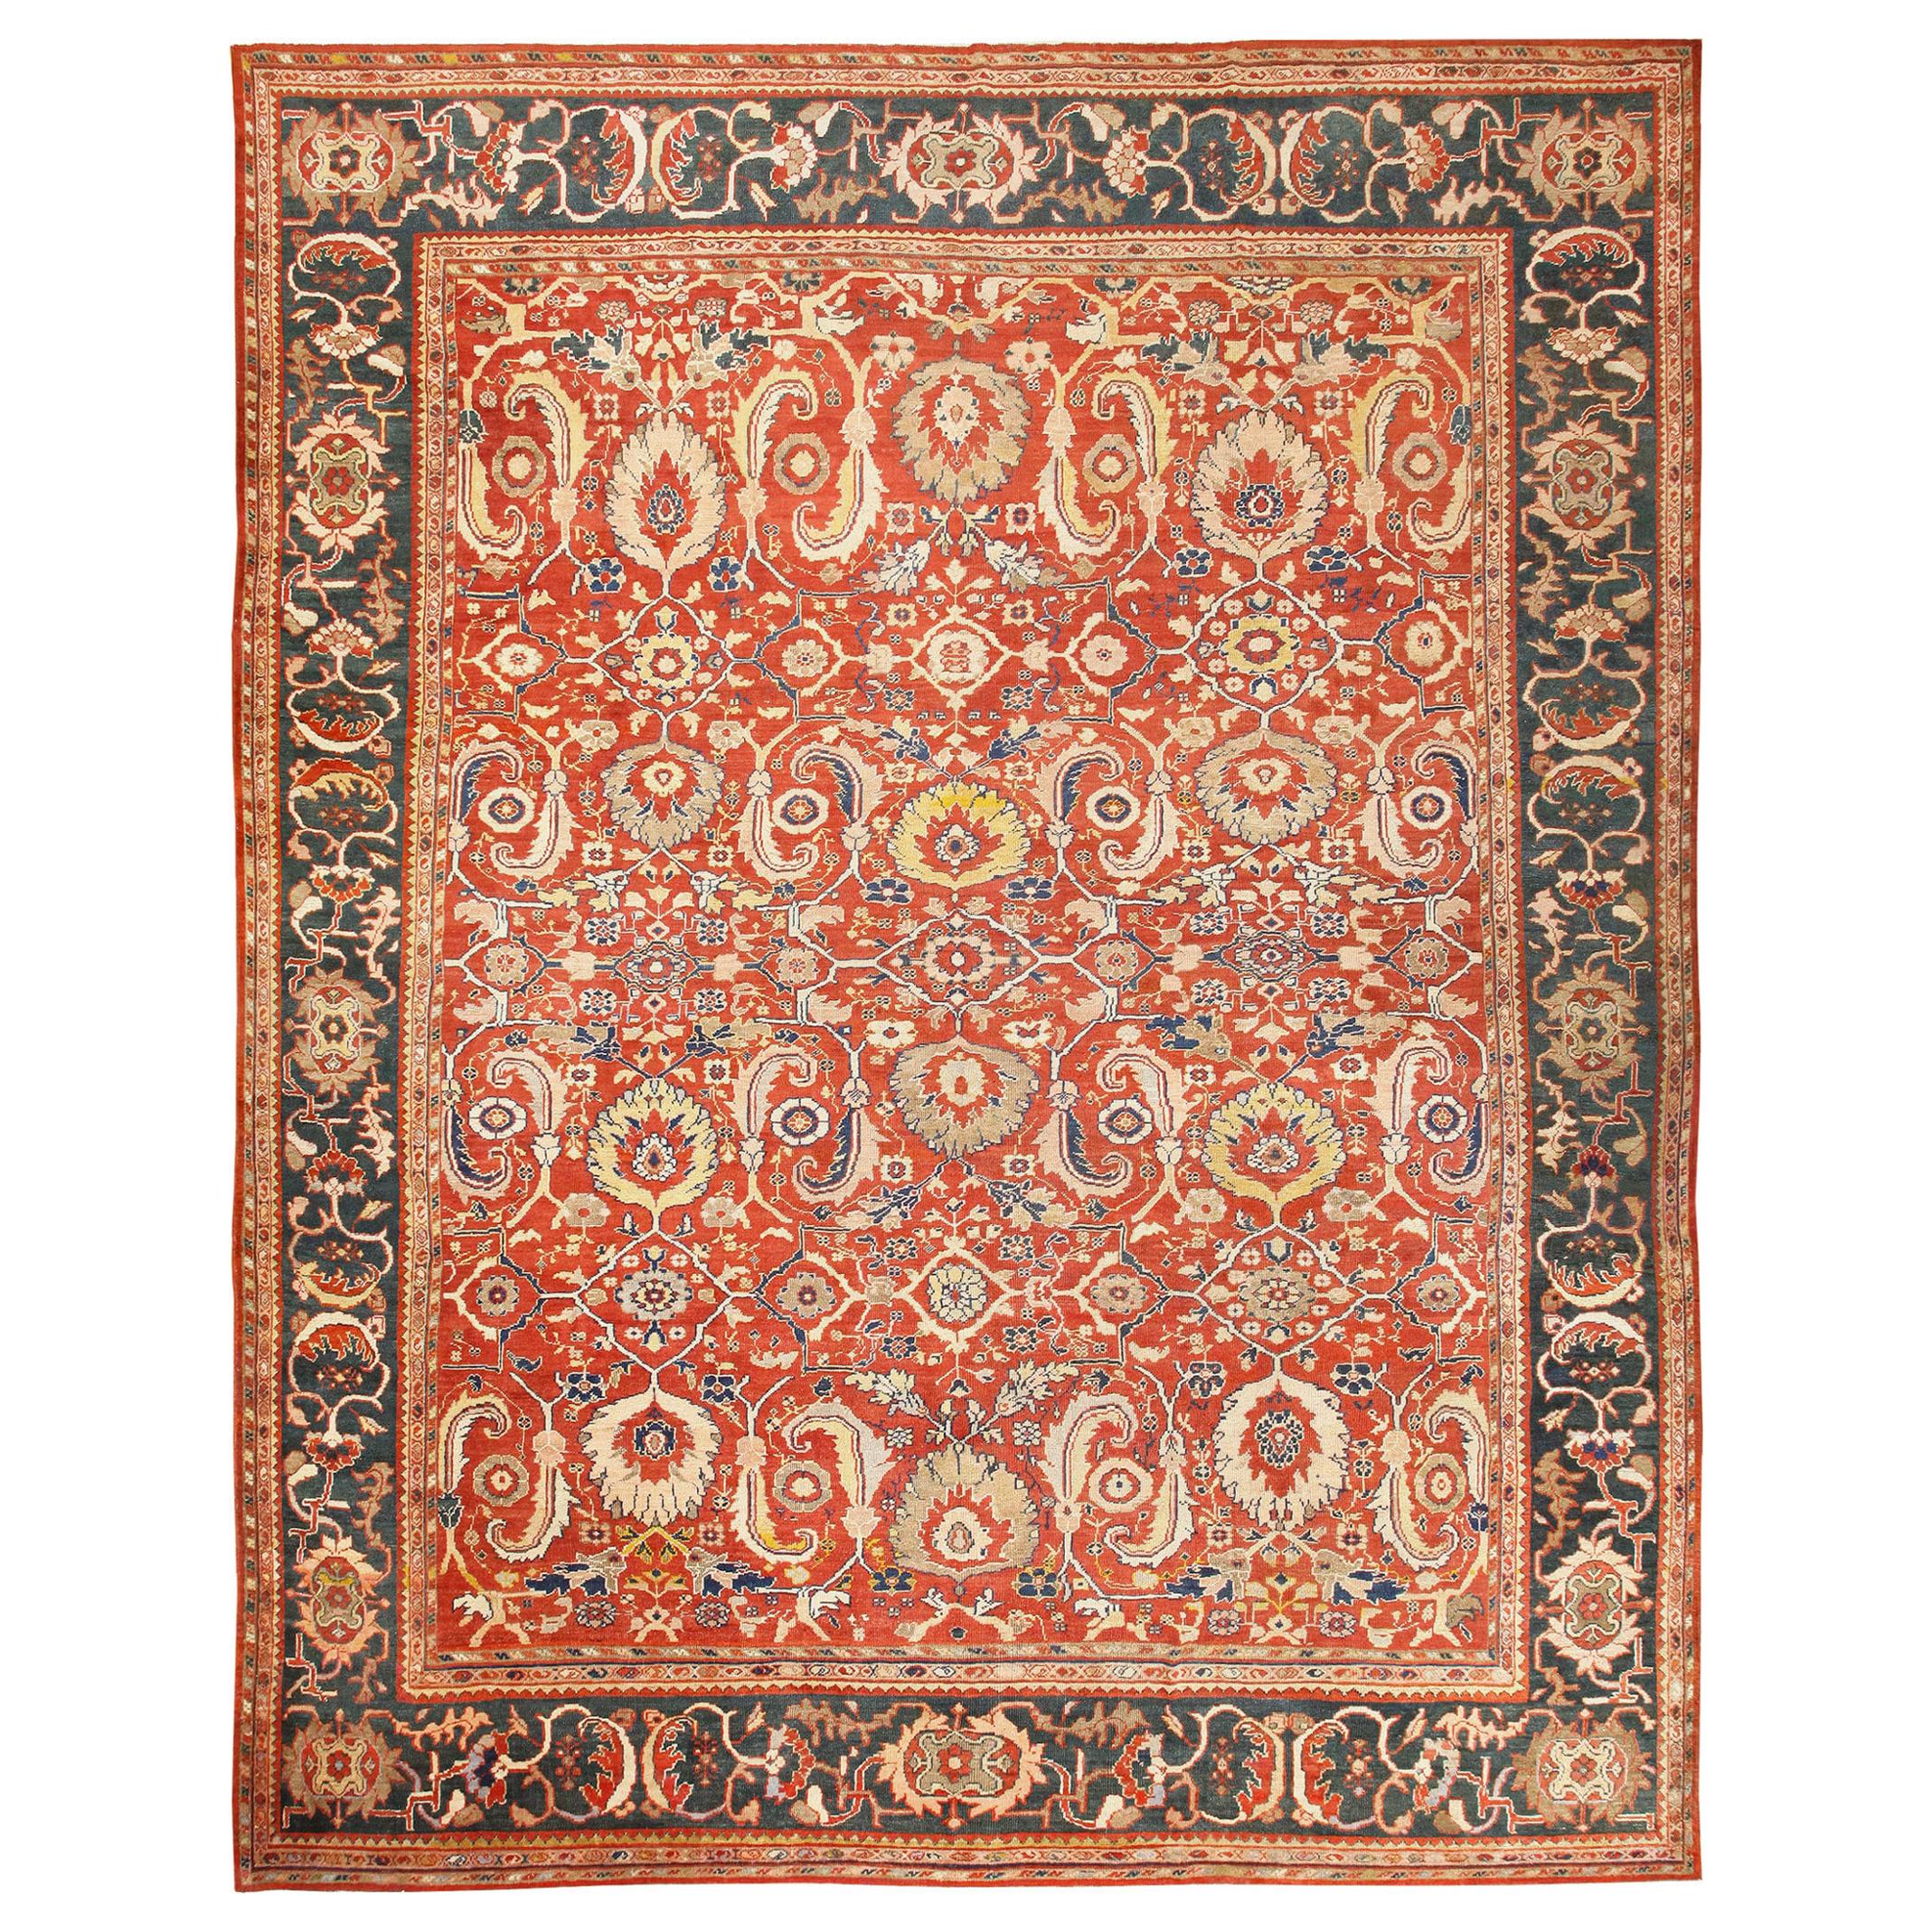 Nazmiyal Collection Antique Persian Sultanabad Rug. Size: 13' 7" x 17'